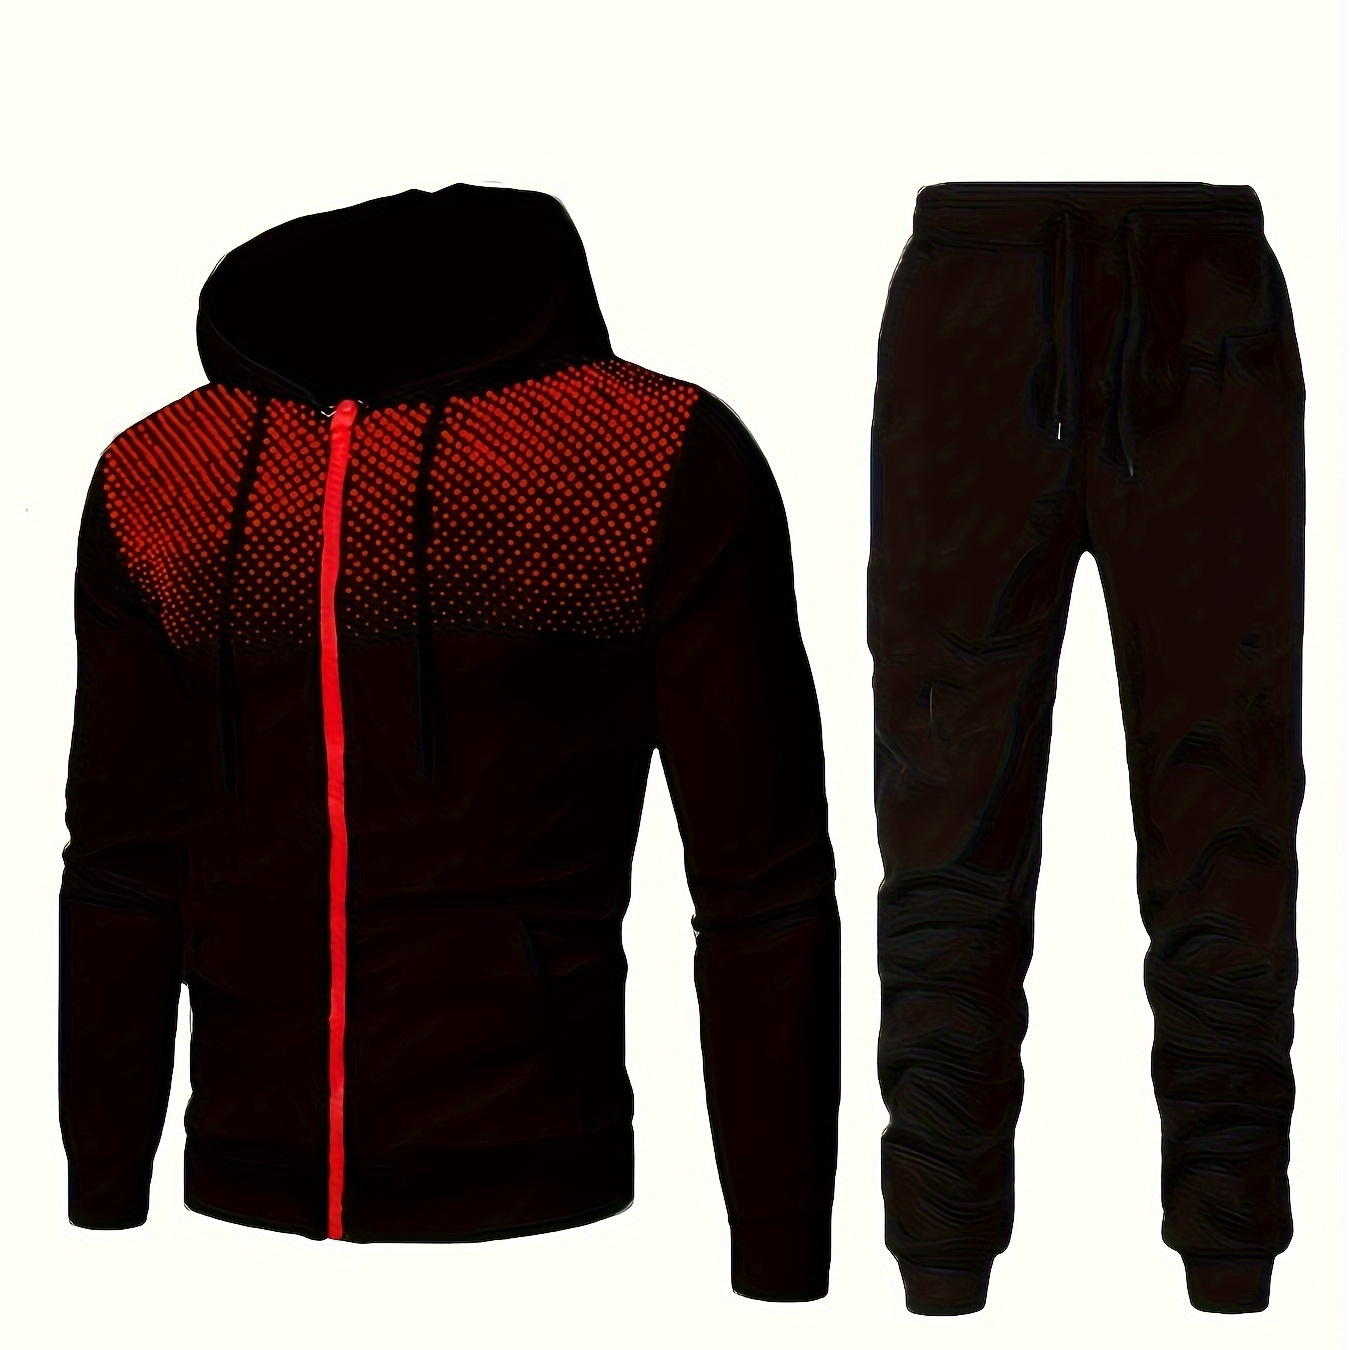 

Classic Men's Athletic 2pcs Tracksuit Set Casual Full-zip Sweatsuits Long Sleeve Hoodie And Jogging Pants Set For Gym Workout Running